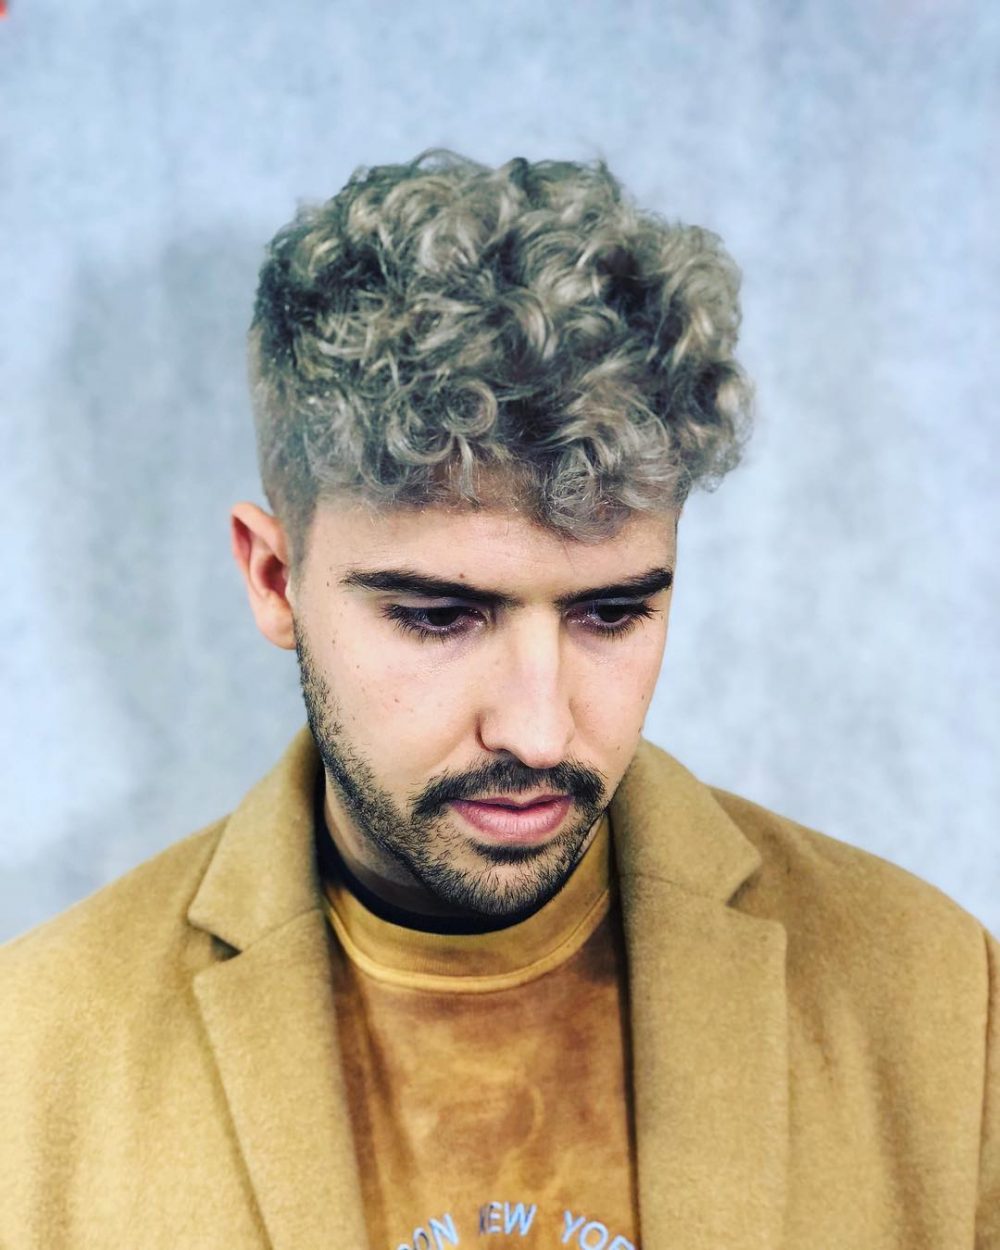 30 Coolest Men’s Hair Color Ideas to Try This Season